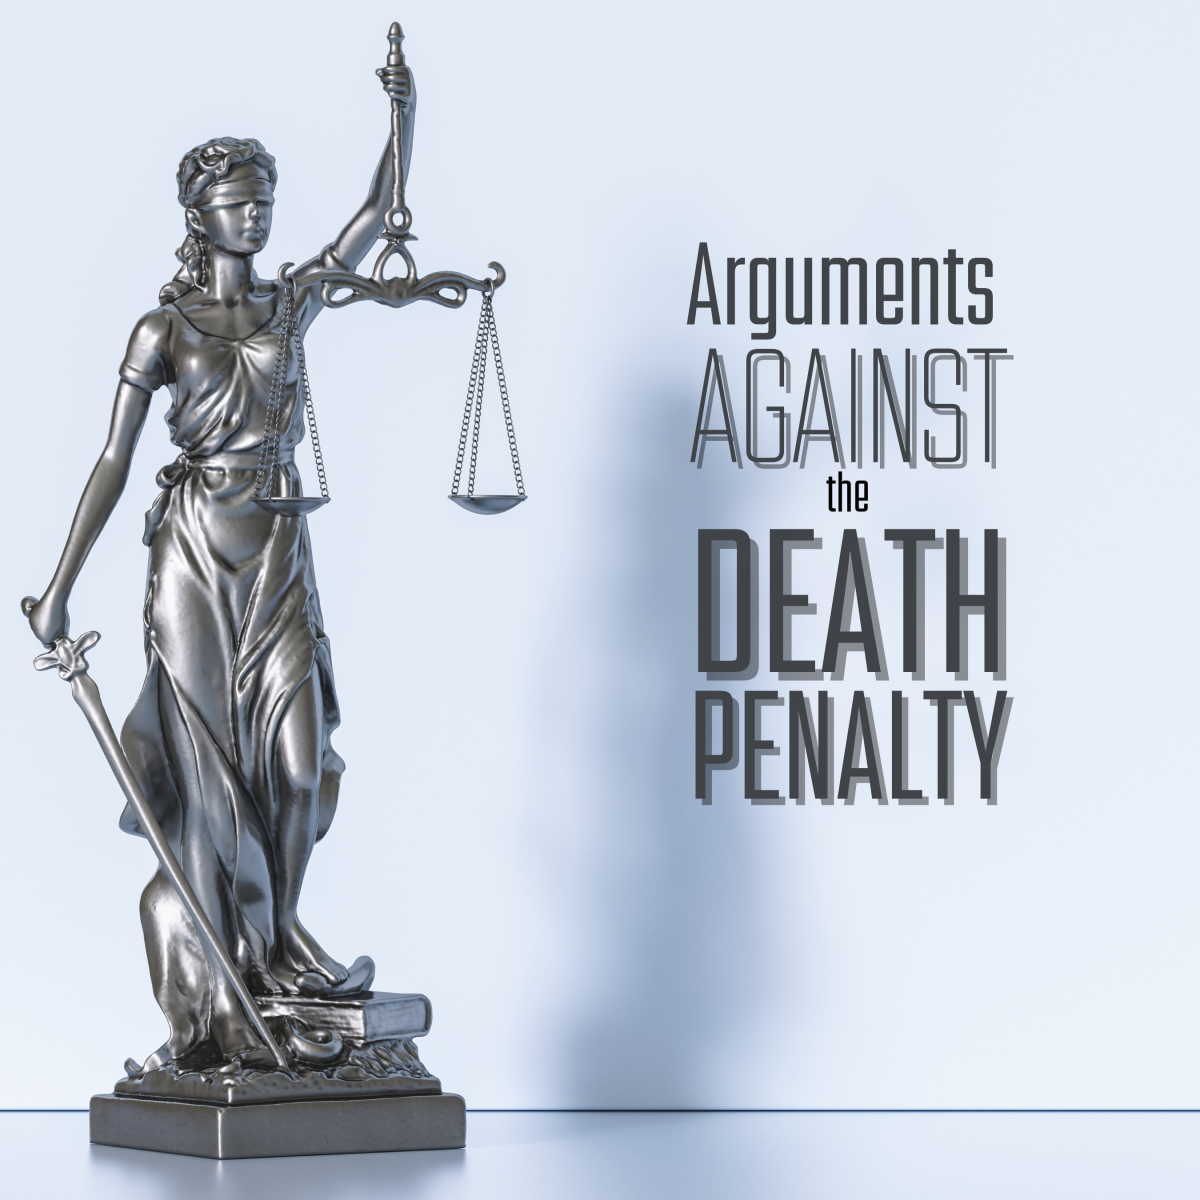 8 Reasons to Be Against the Death Penalty